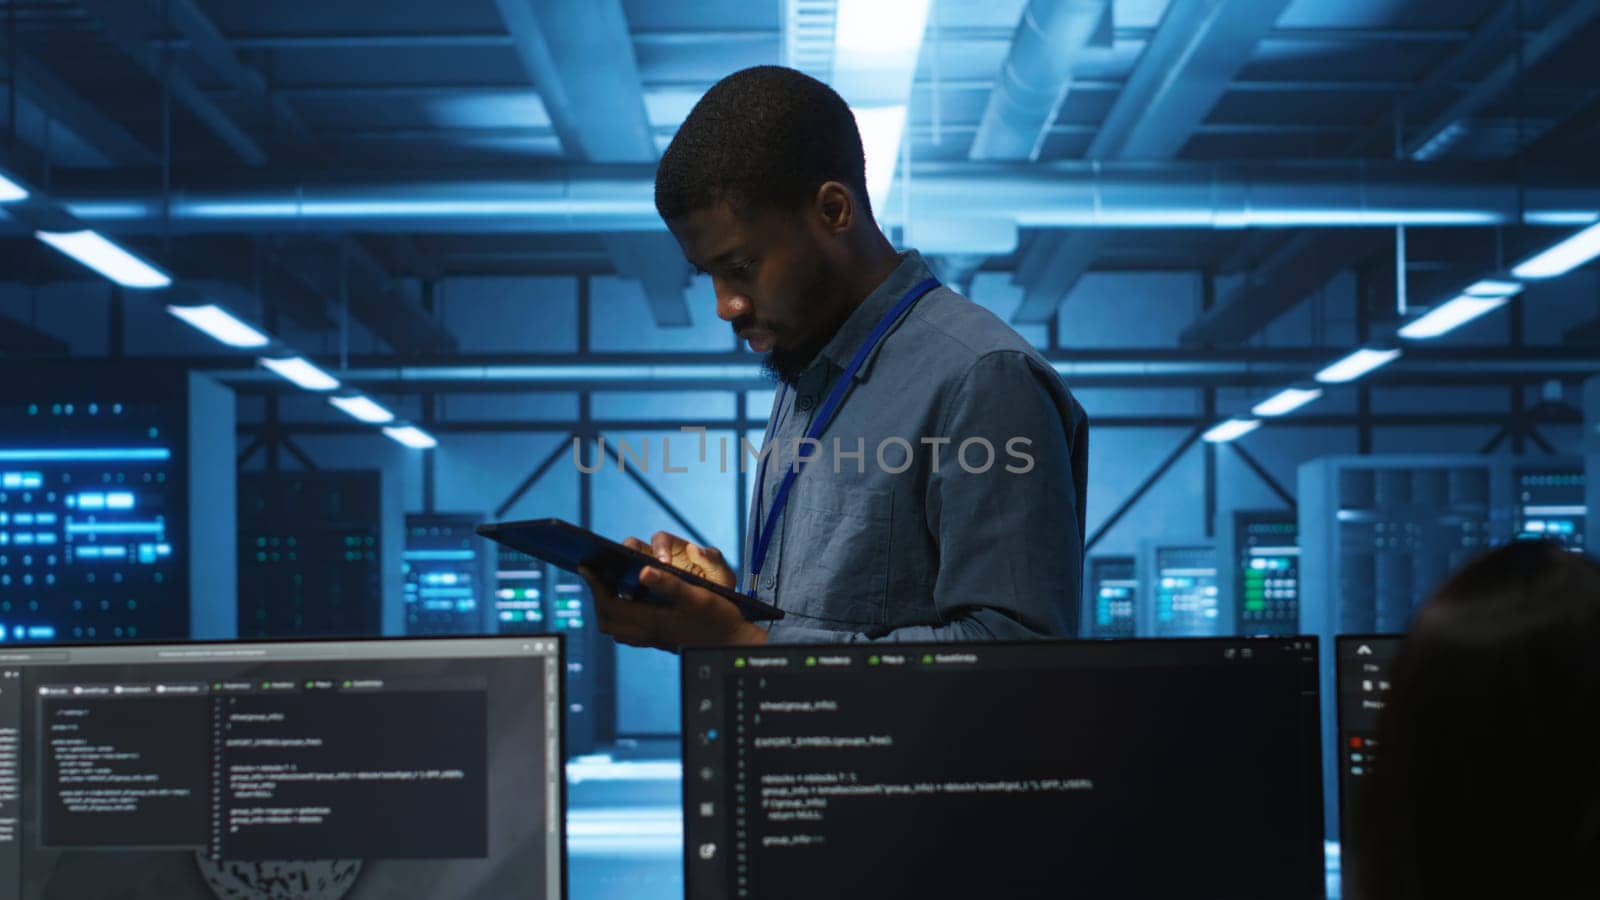 Manager uses tablet, supervising team programming servers providing computing resources for different workloads. Inspector using device to oversee engineers in data center mending supercomputers